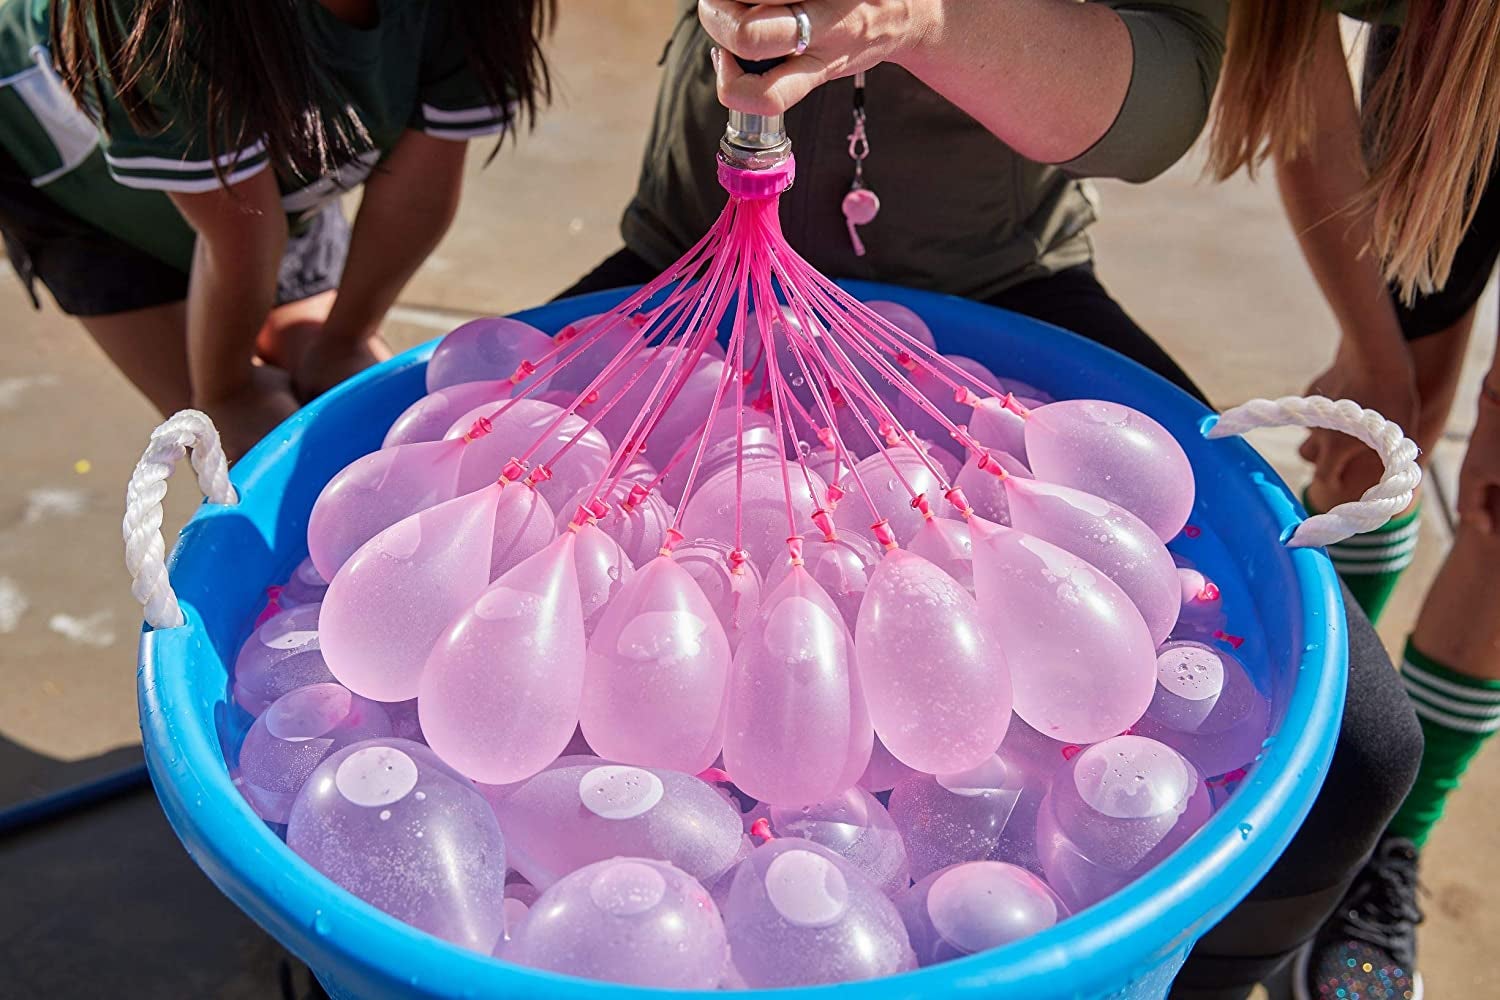 dozens of balloons attached to a hose and filling with water at the same time